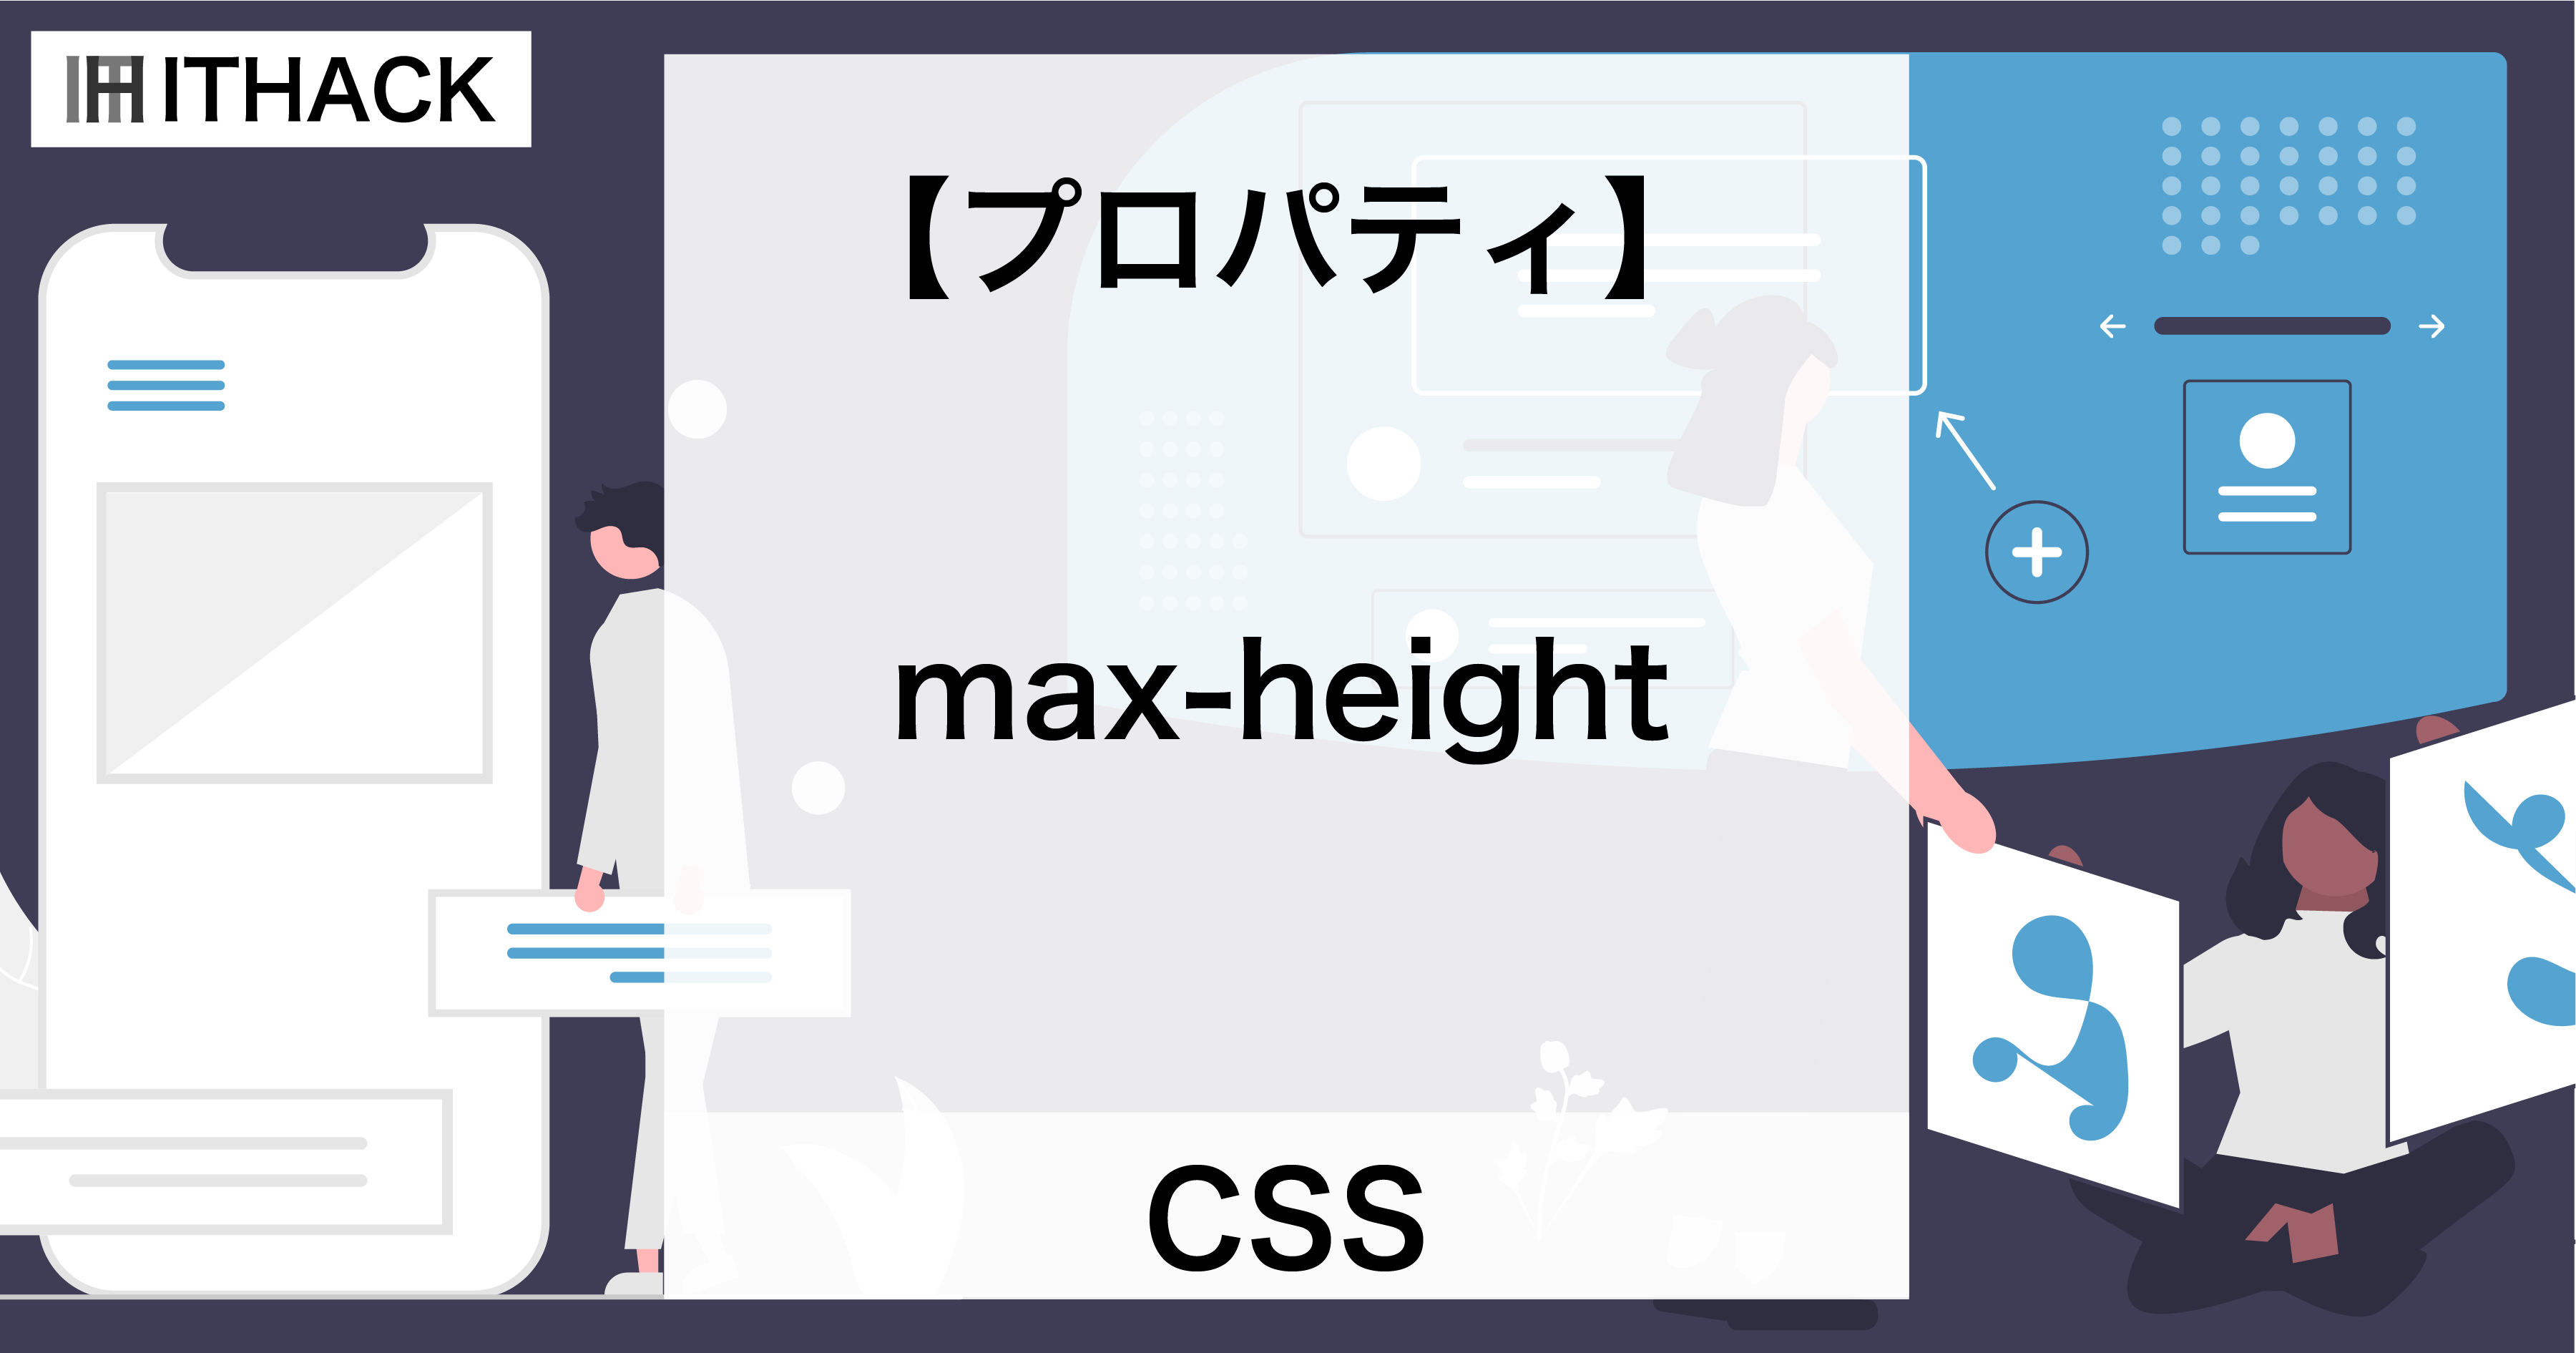 【CSS】max-height - 要素の高さ（最大値）